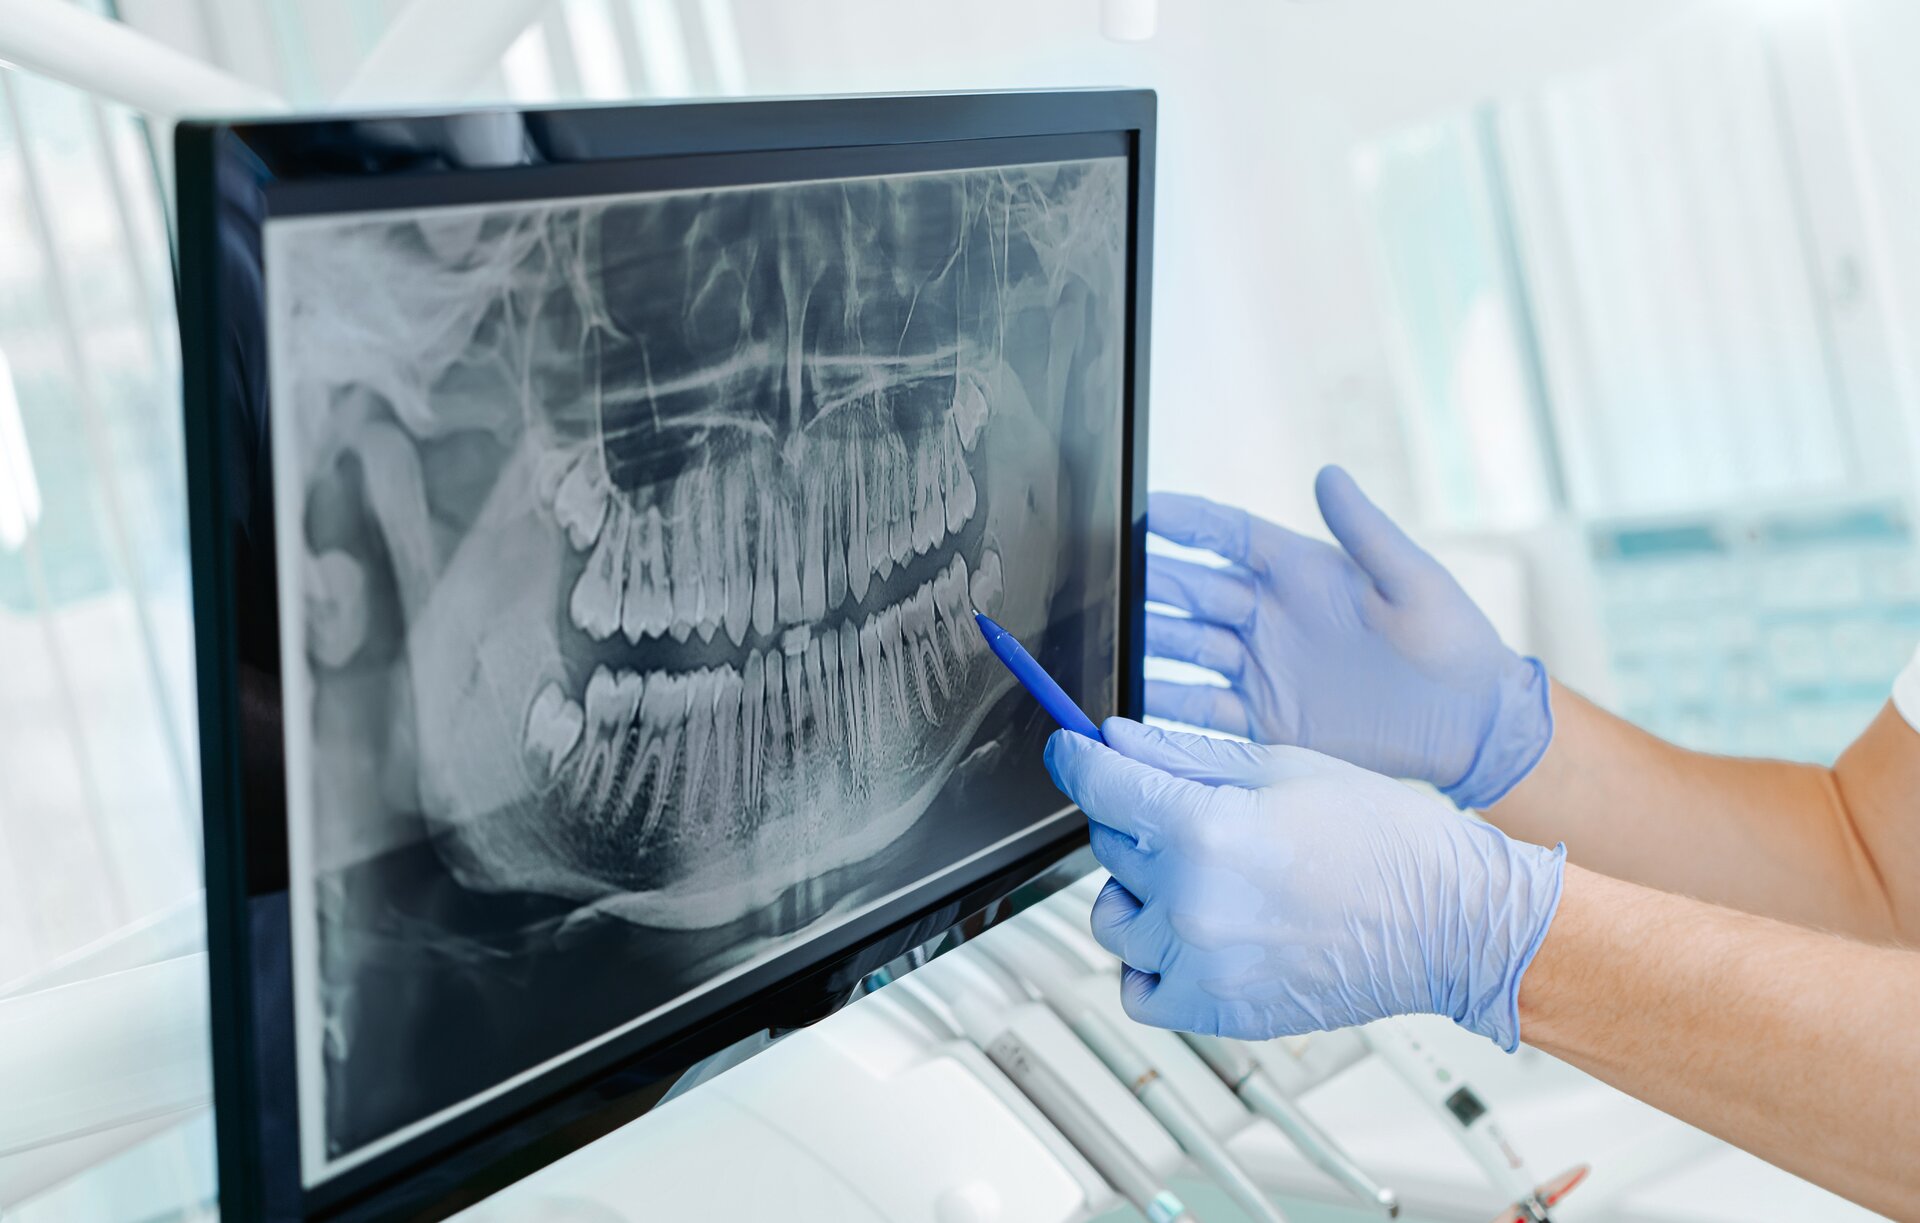 stock-photo-hands-doctor-dentist-in-gloves-show-the-teeth-on-x-ray-on-digital-screen-in-dental-clinic-on-light-1798261573